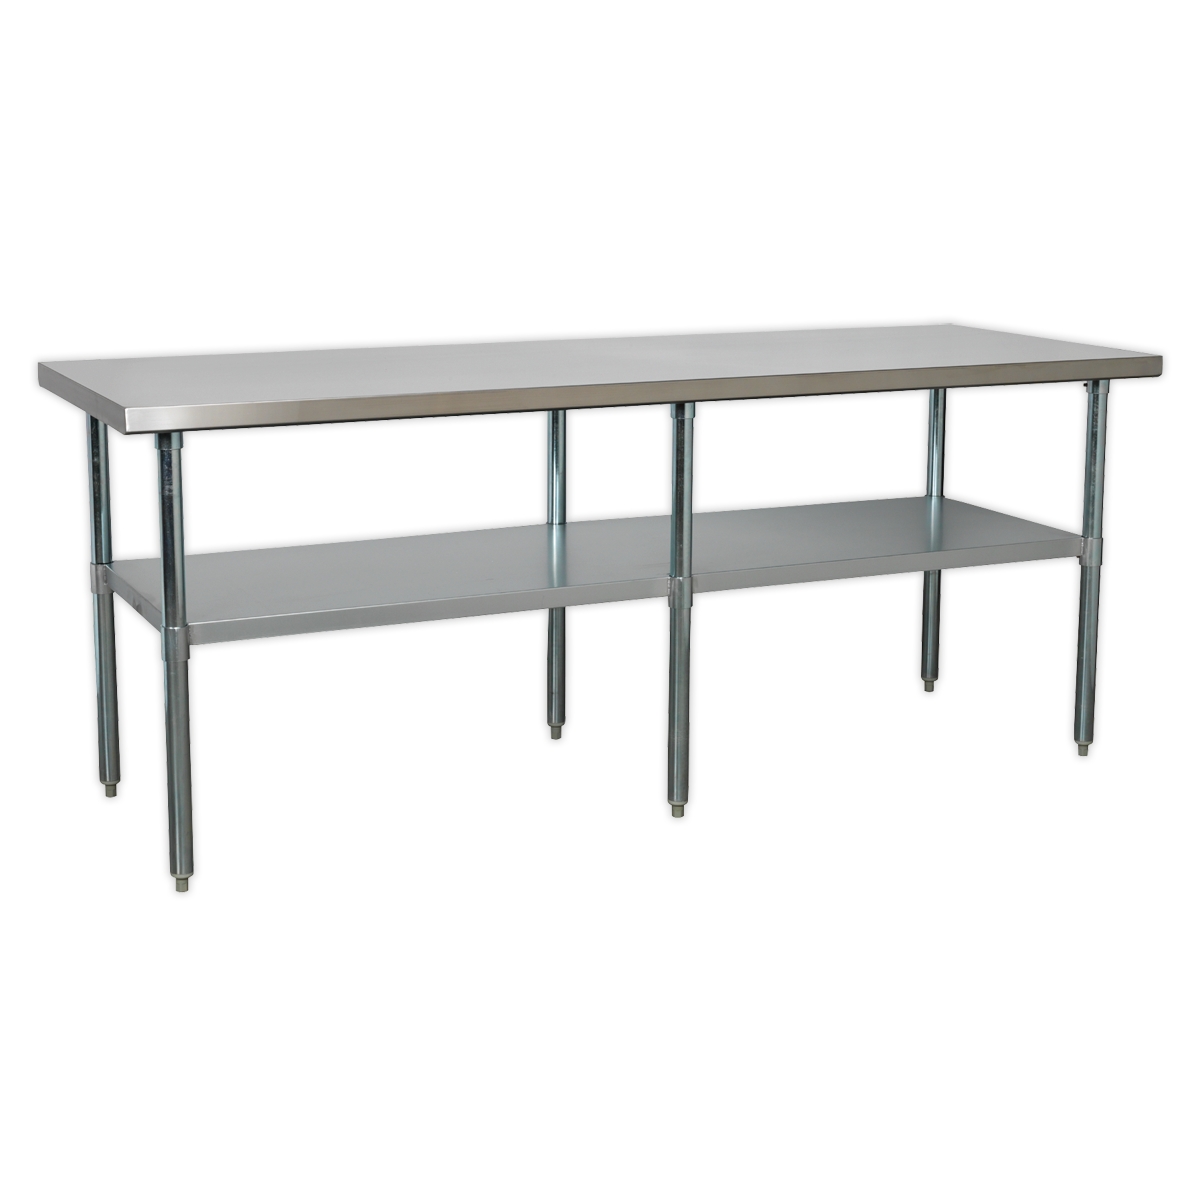 Sealey Stainless Steel Workbench 2.1m